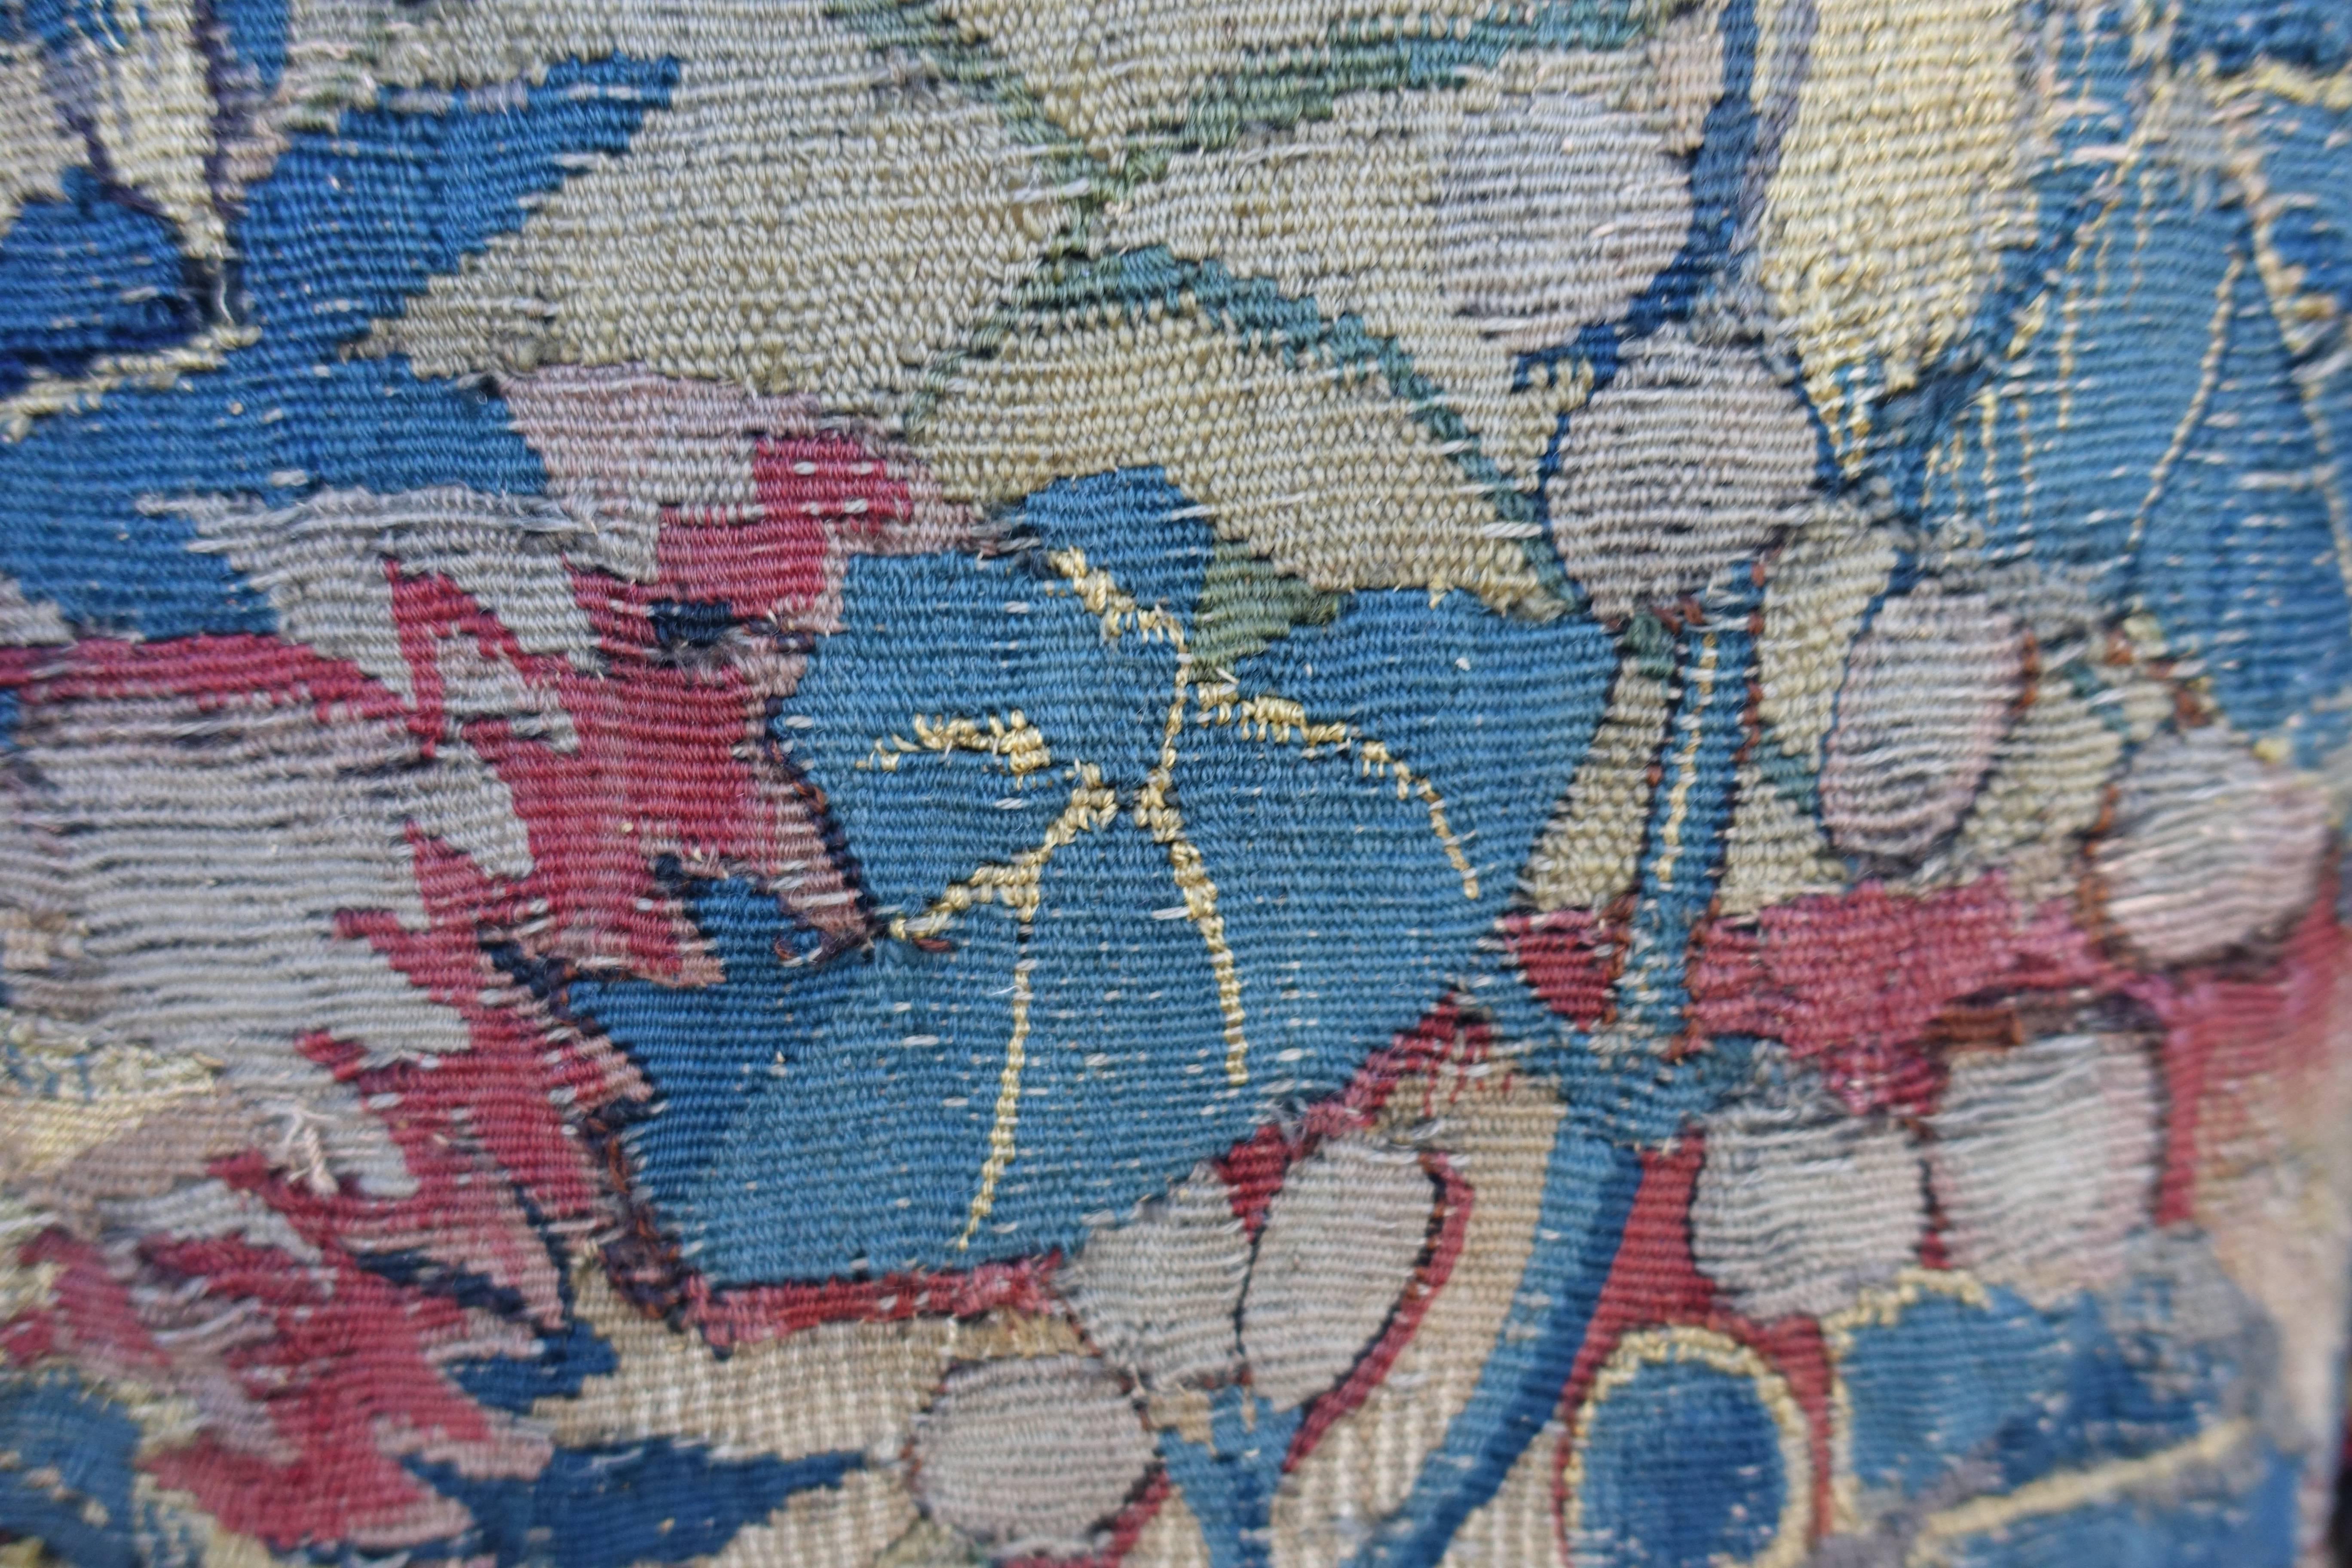 Hand-Woven 18th Century Tapestry Pillows, Pair